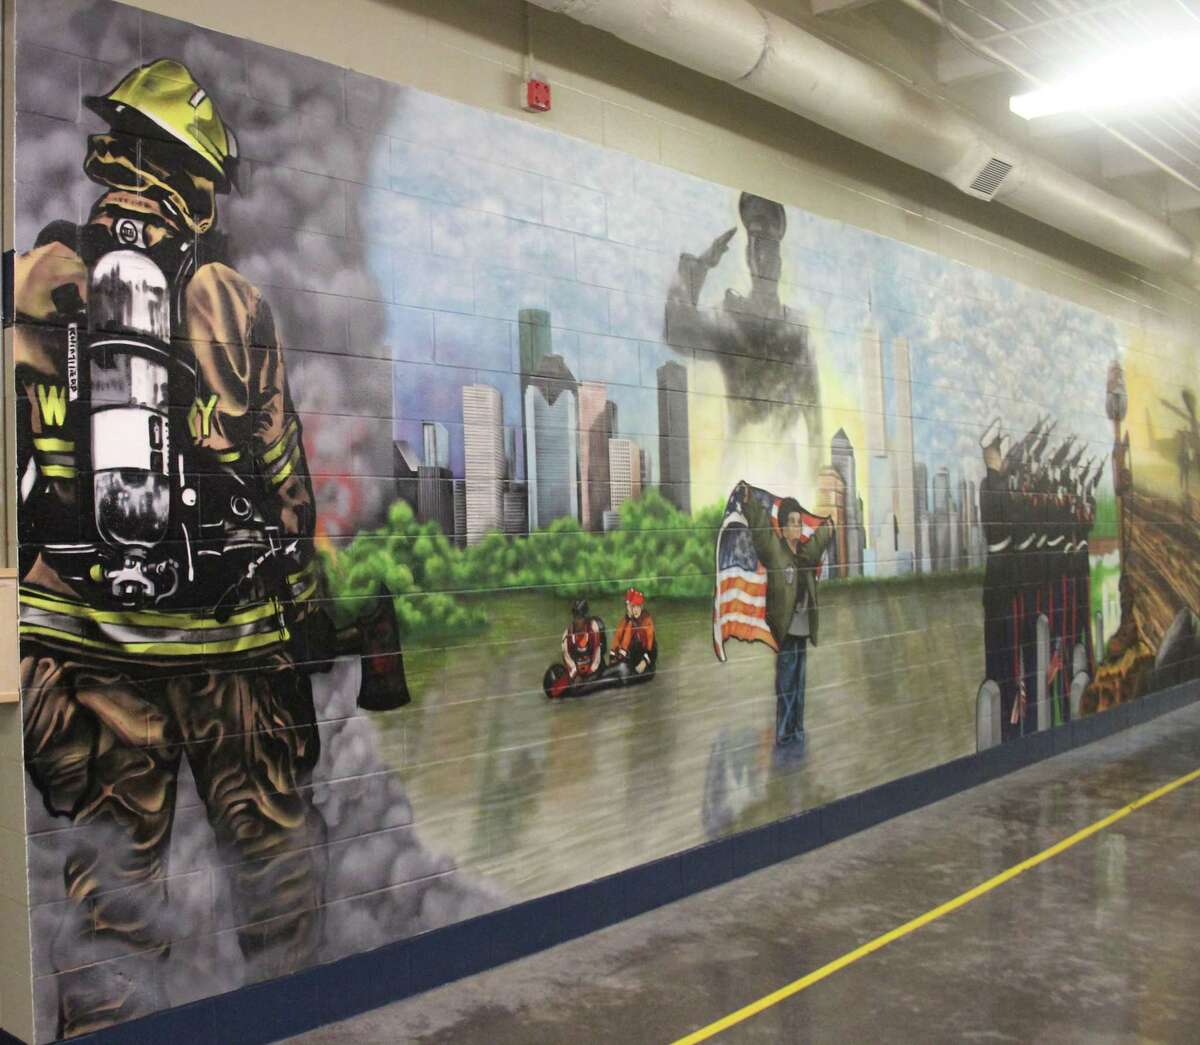 A mural lines one of the halls of the Cleveland Correctional Center. The mural was created by former inmate Anthony Rose and depicts a tribute to the United States military, First Responders, victims of Hurricane Harvey and 9/11.